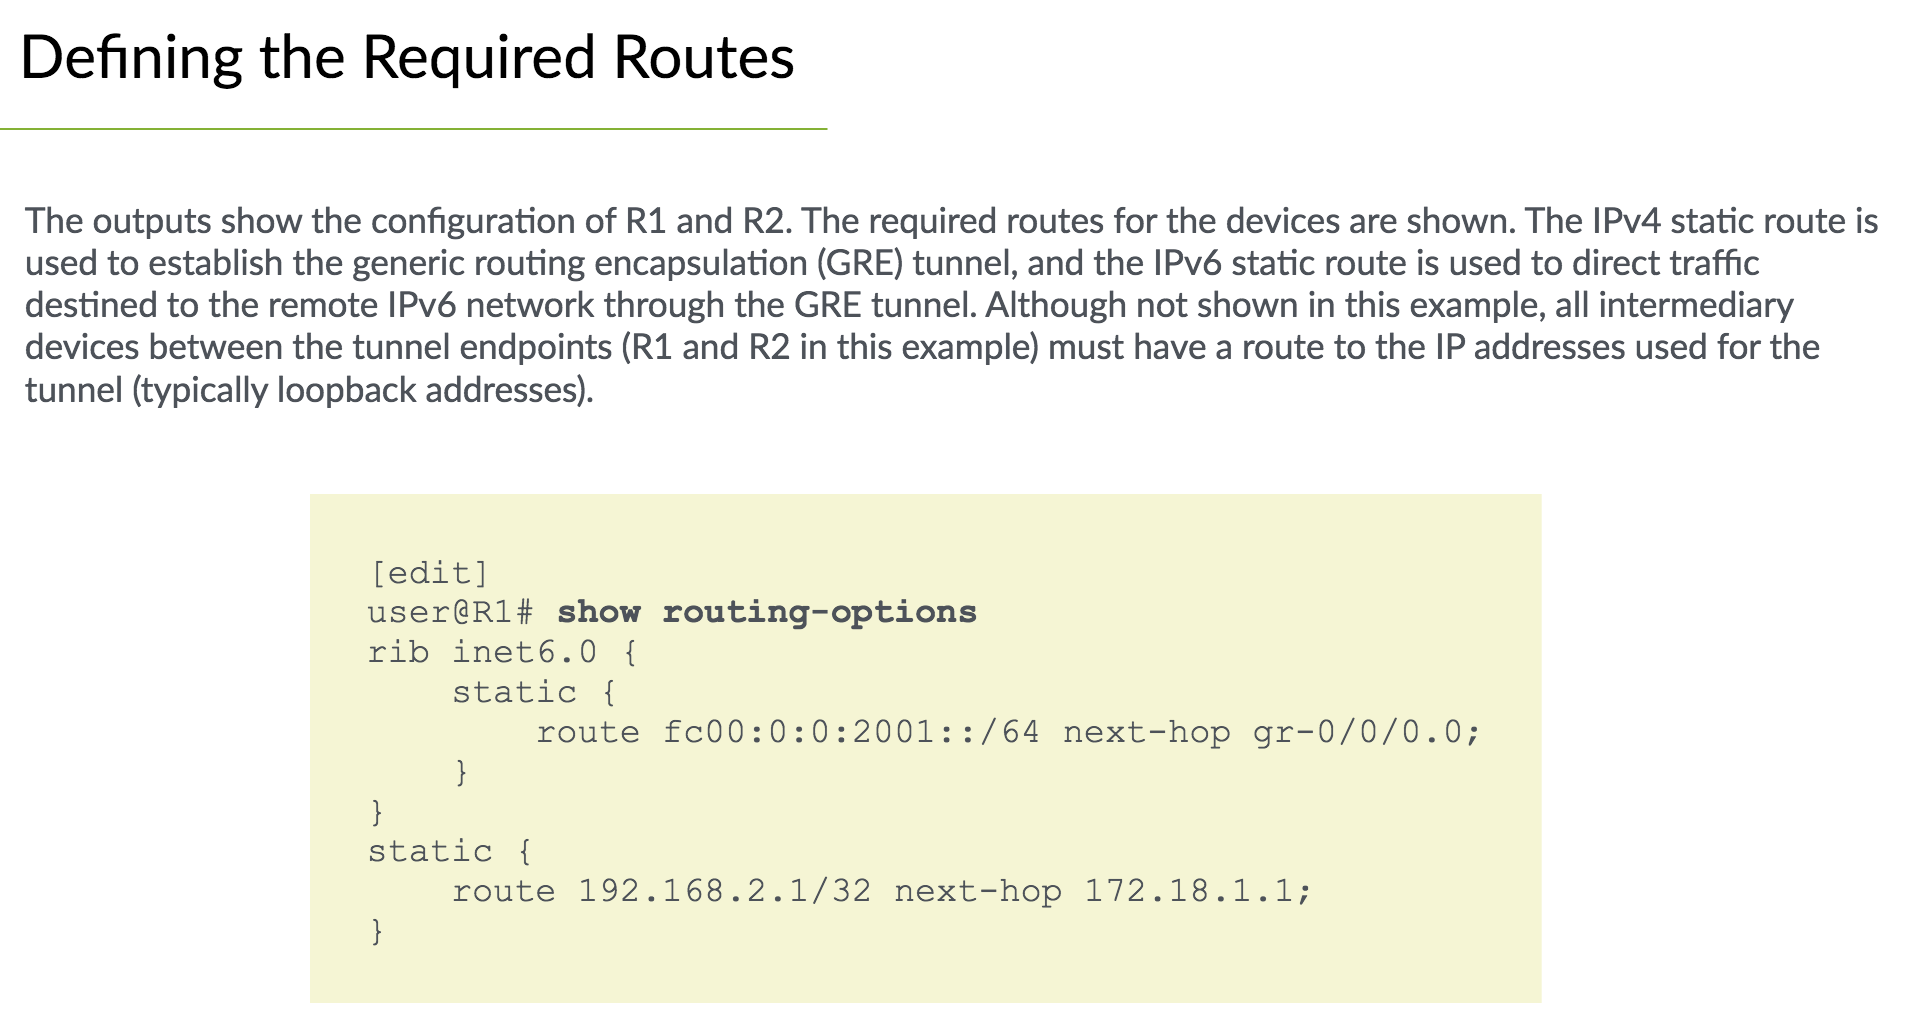 ipv6-tunneling-2-defining-required-routes